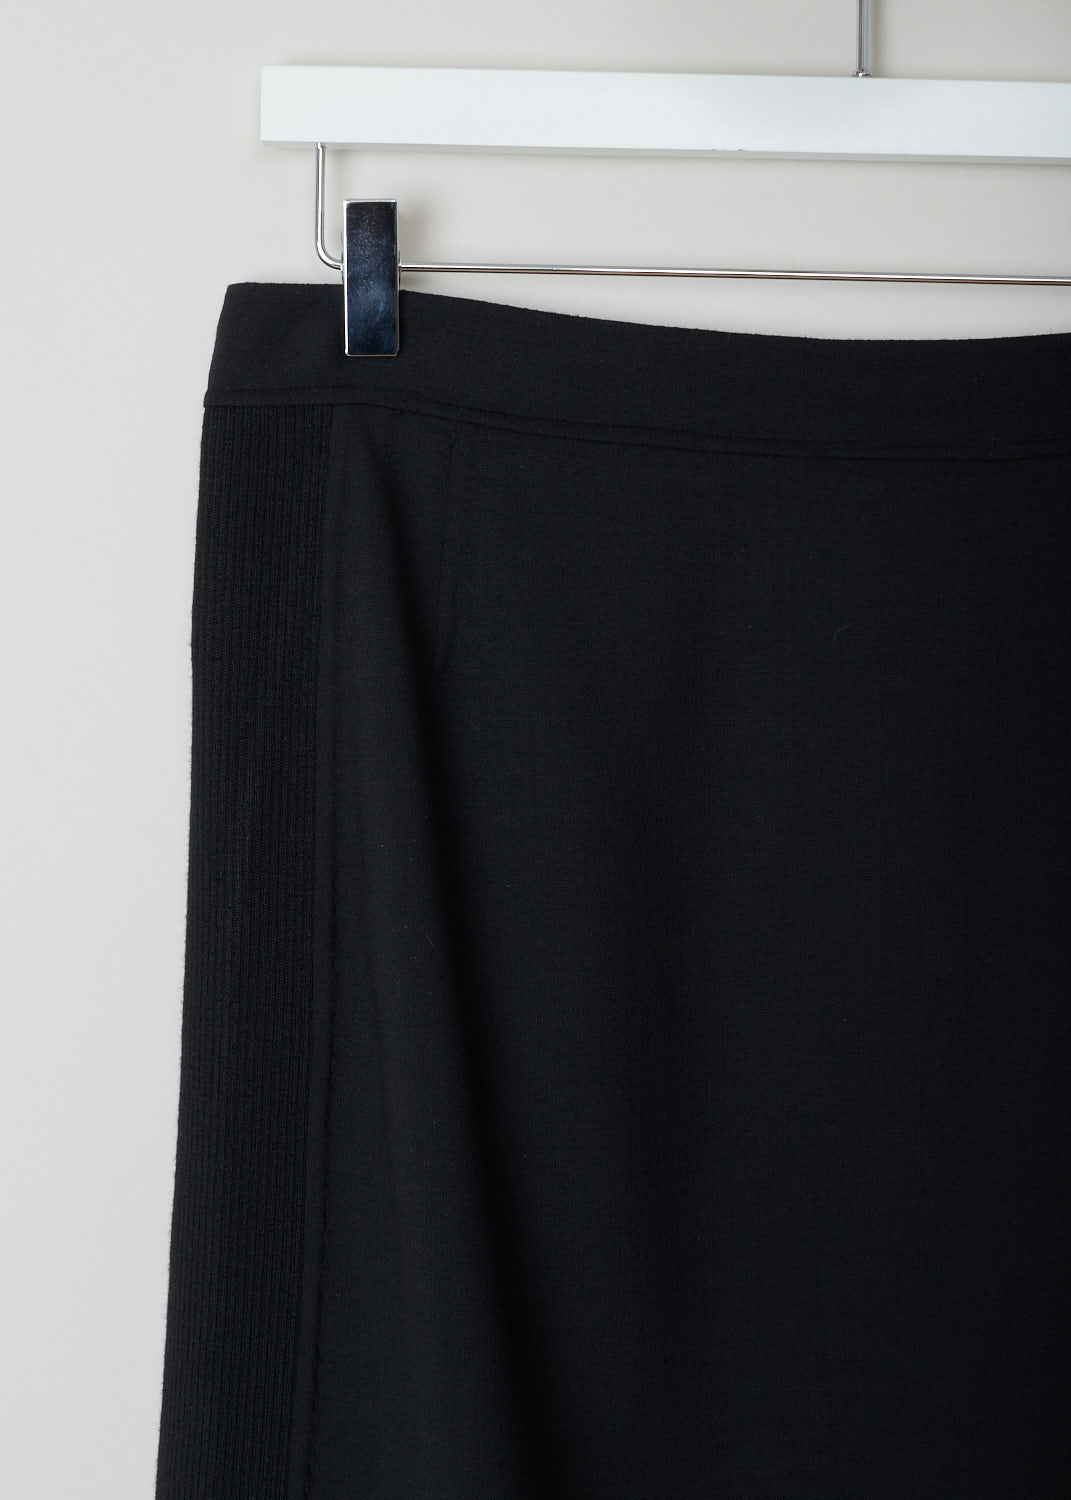 Prada, Straight black skirt with ribbed sides, Lana_double_21H593_F0002_nero, black, detail, Black skirt cut in a straight model made with stretchy materials for that extra bit of added comfort. Featuring ribbed sides and has a concealed zipper as your fastening option. Has a matching blazer 